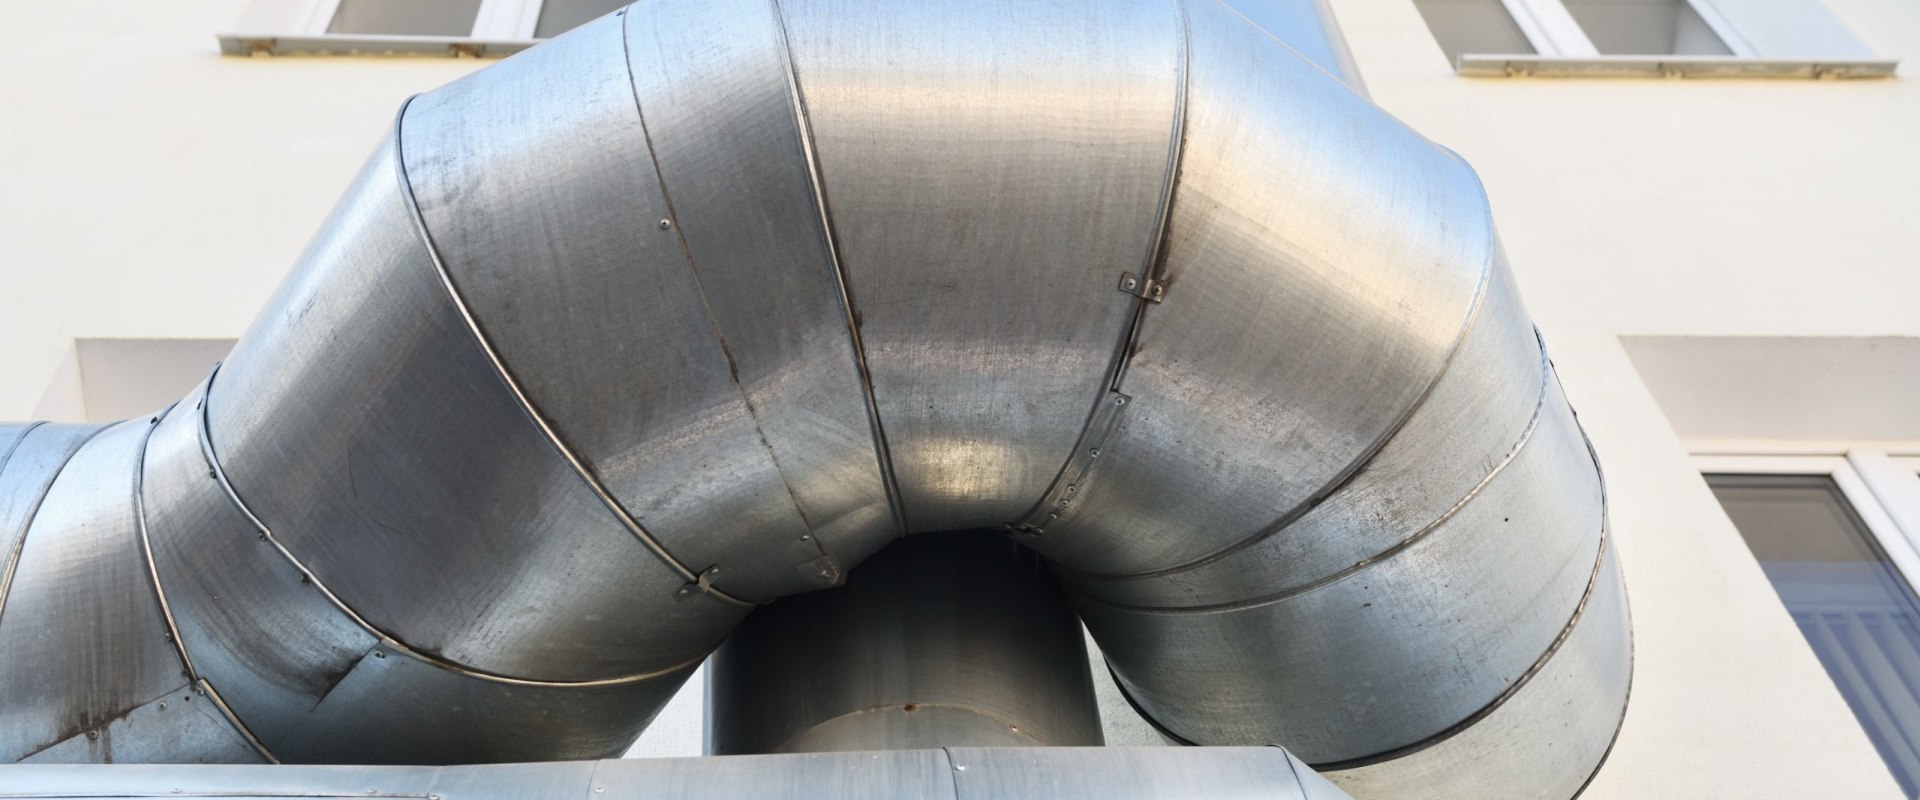 The Benefits of Plastic Ducts for Efficient Air Conditioning